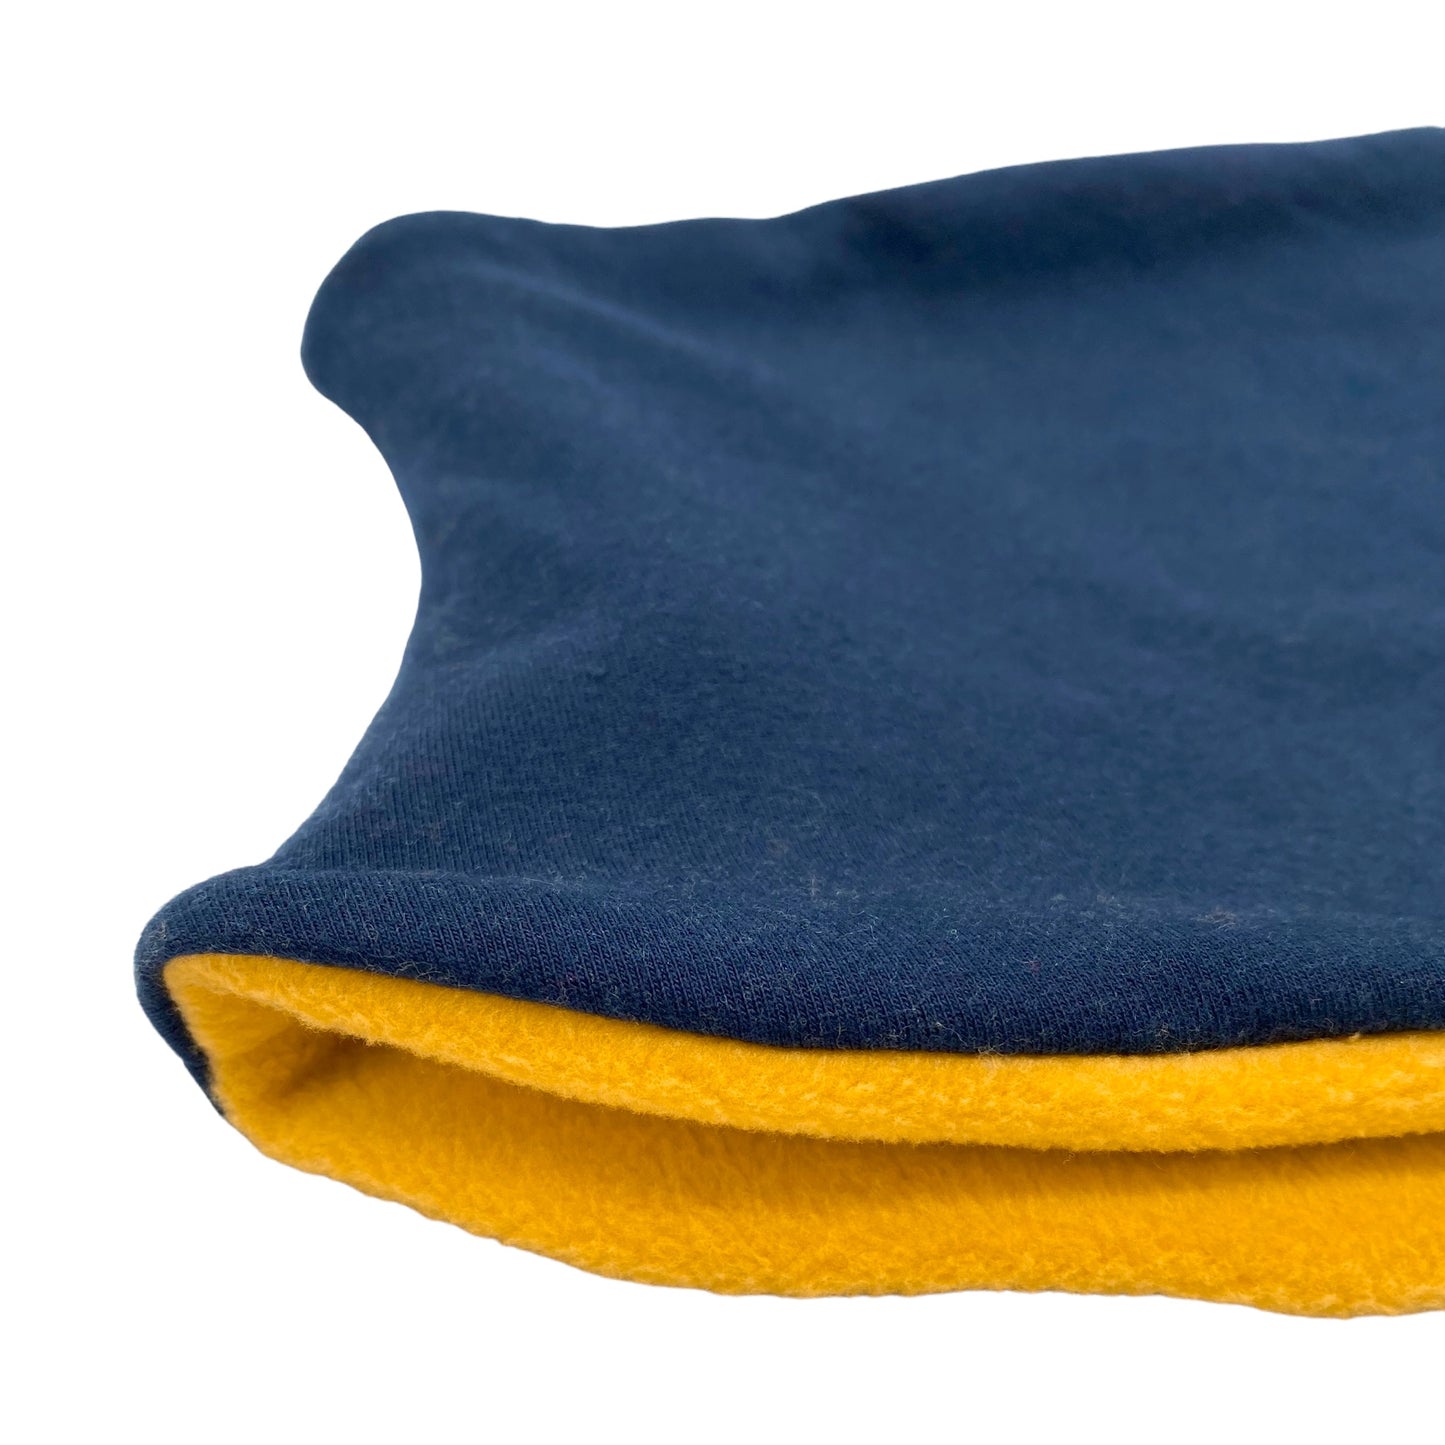 Adult Handmade Neck Warmer Solid Navy Blue (multiple liners available)